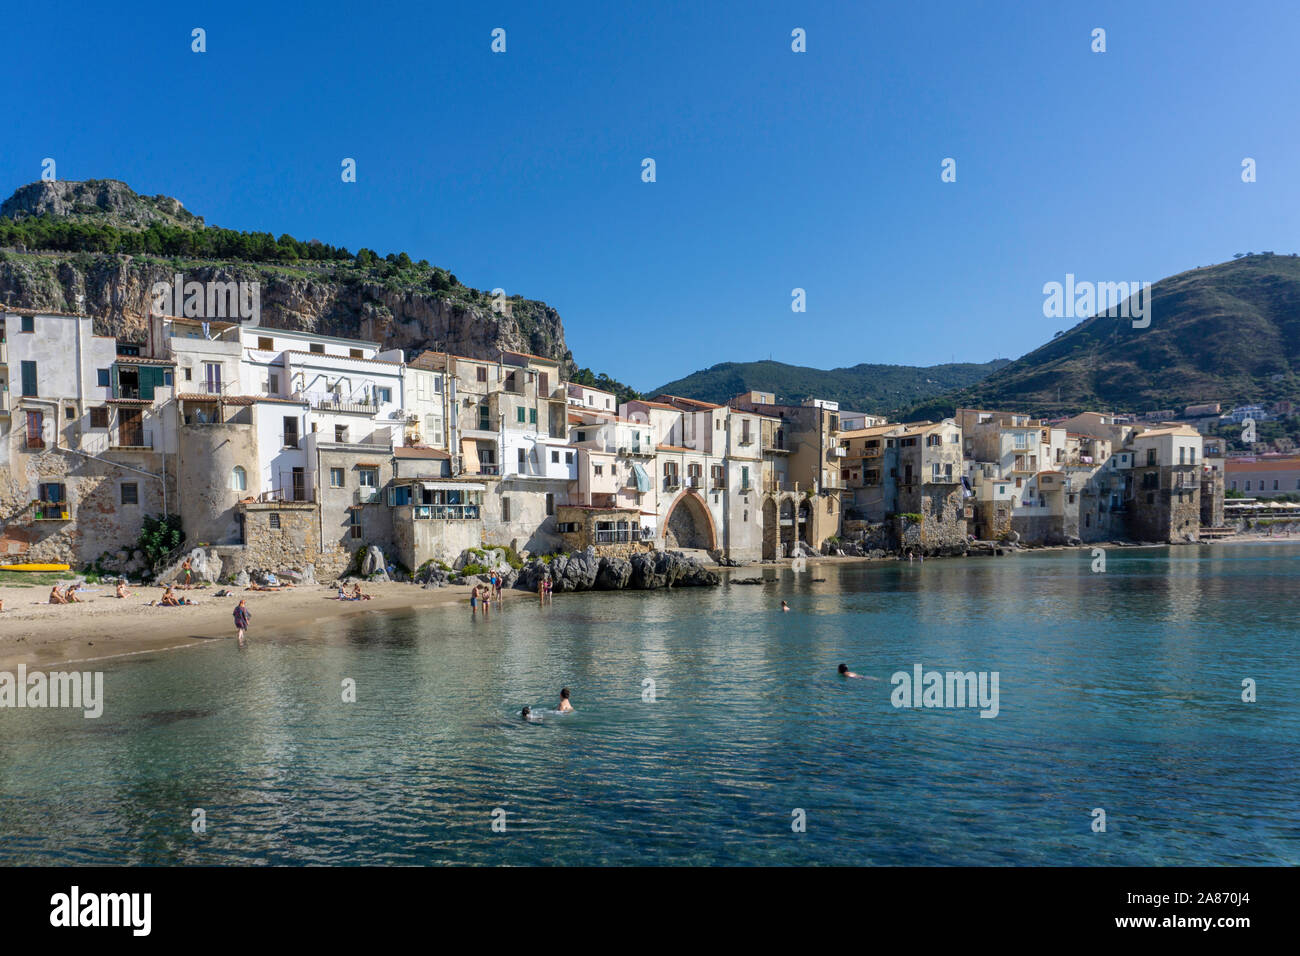 The Old Town of Cefalú, Sicily, Italy, viewed from the pier area with the rocky crag known as La Rocca looming over the town. Stock Photo